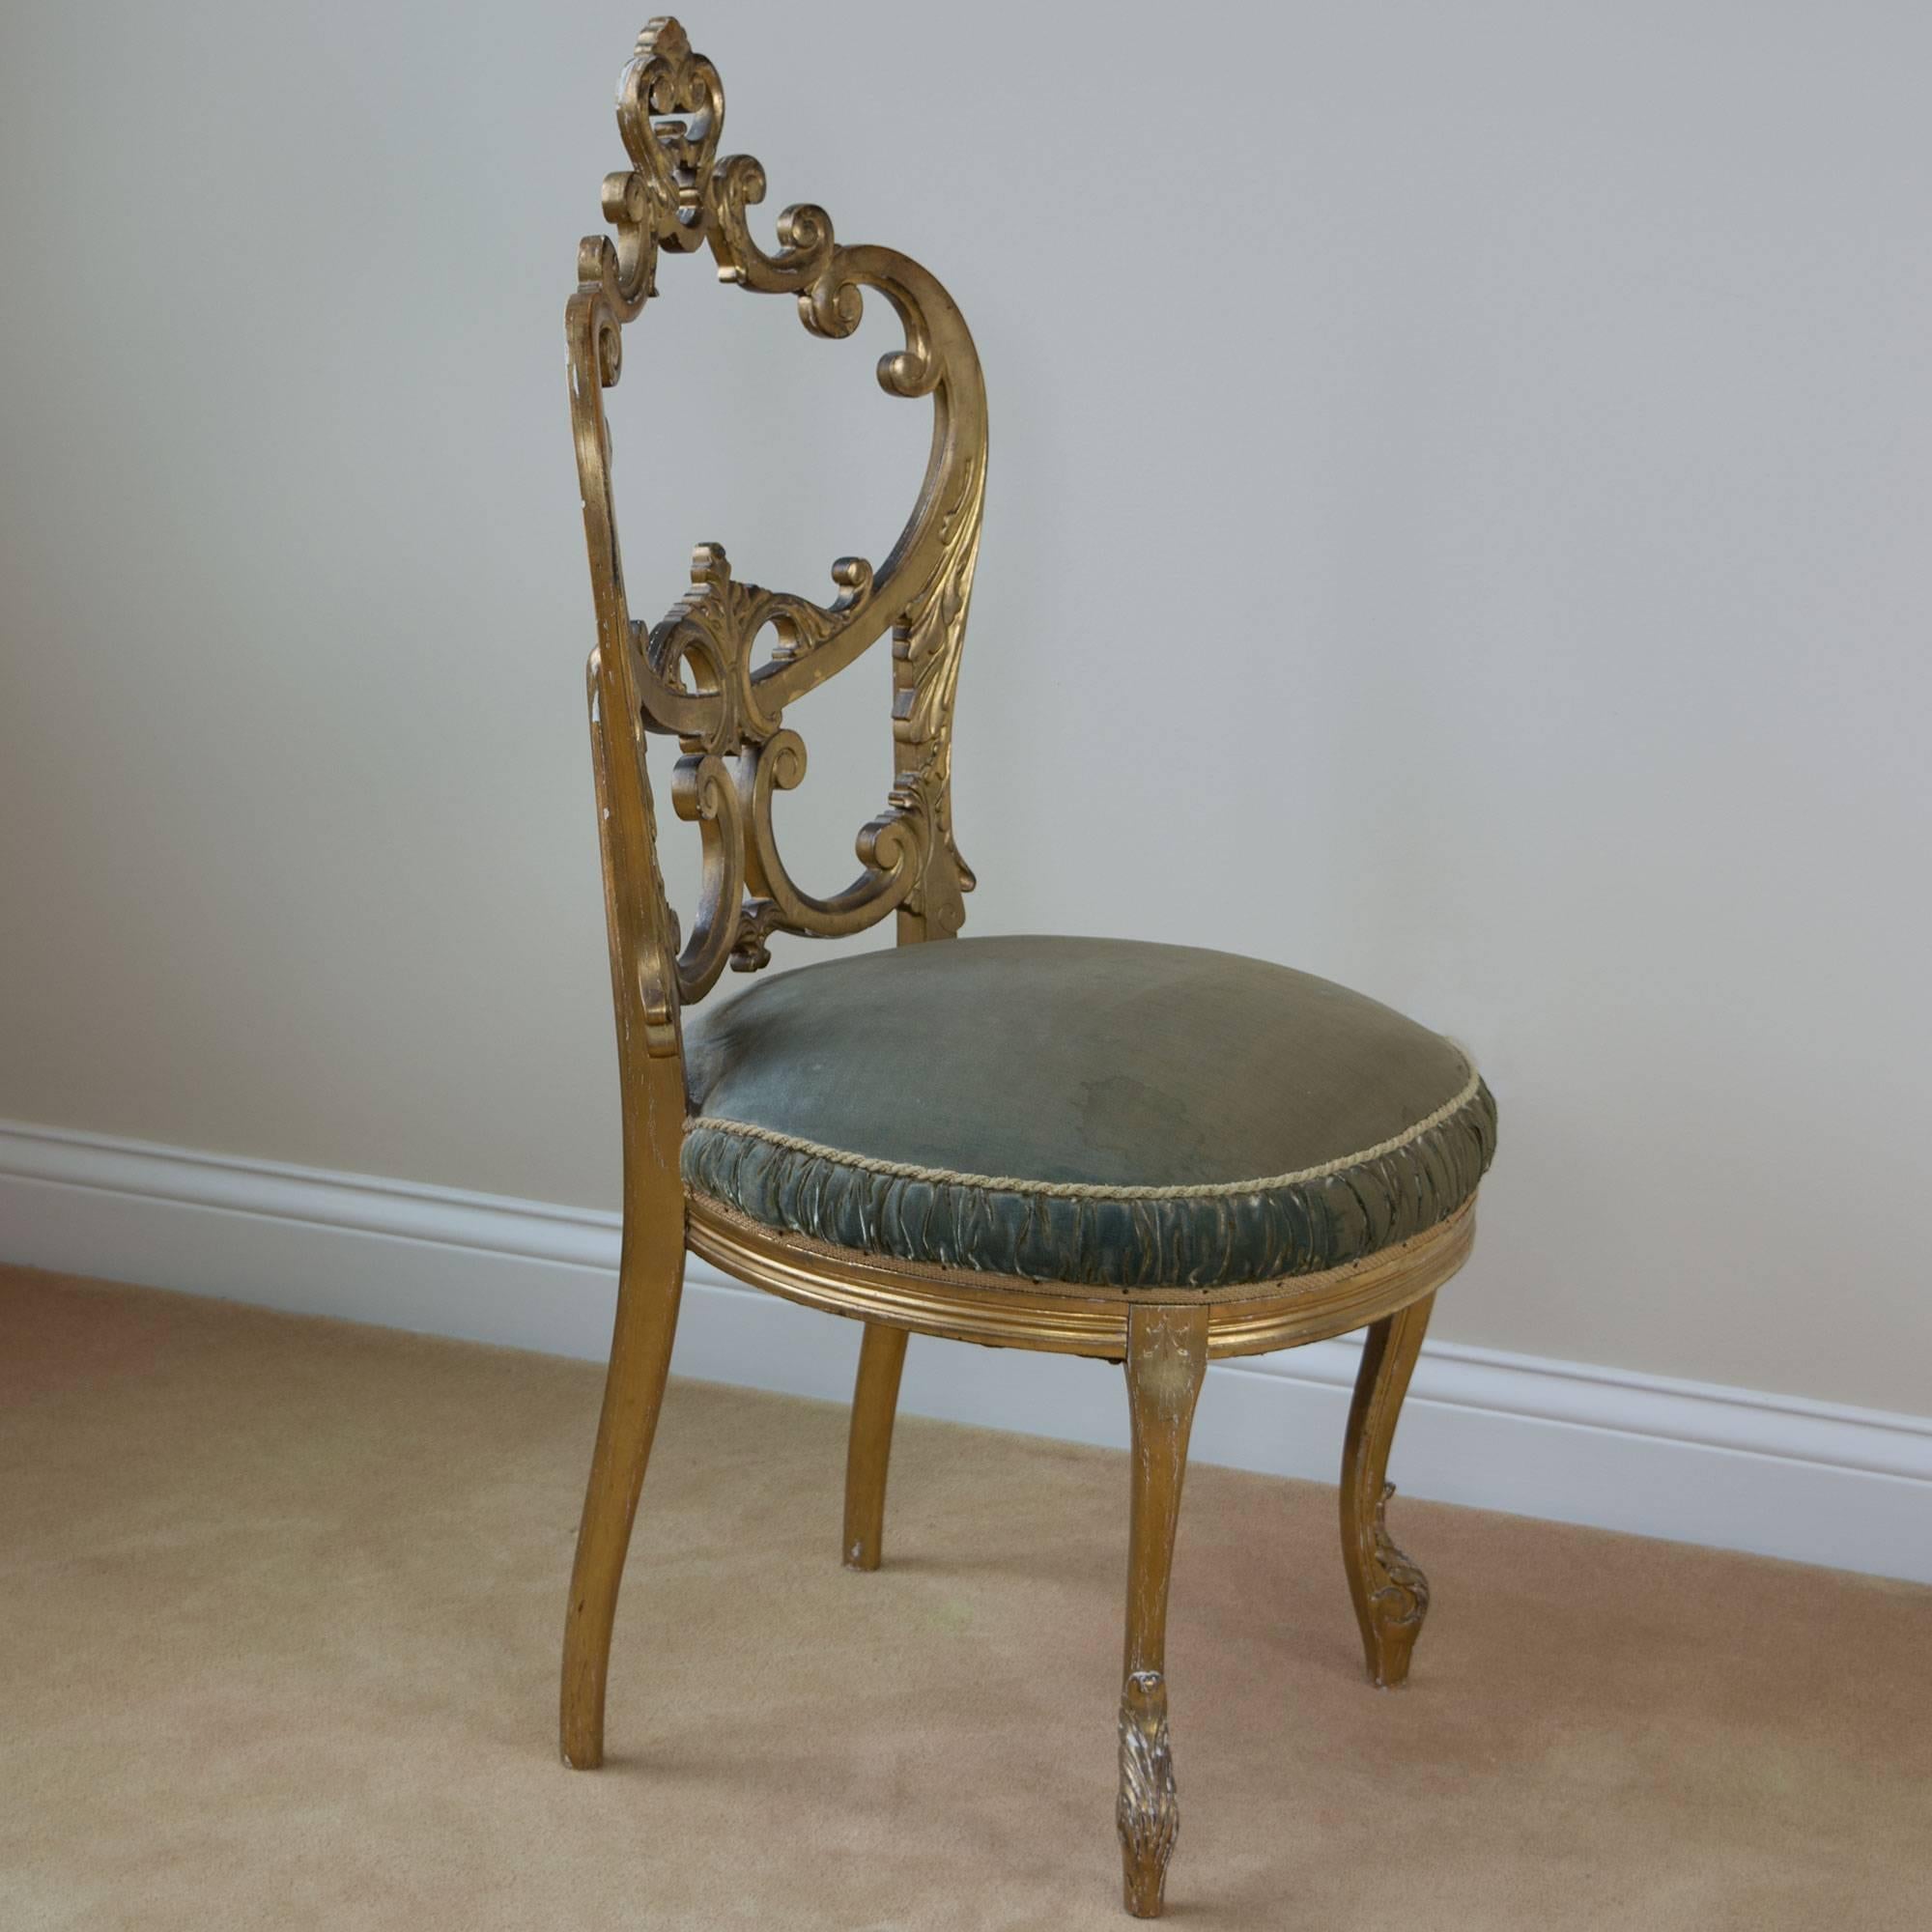 A gorgeous Louis XV style salon chair in giltwood with intricately carved back, slightly curved cabriole legs holds a round seat in tufted velvet. Measure: Seat height 17.5 inches.